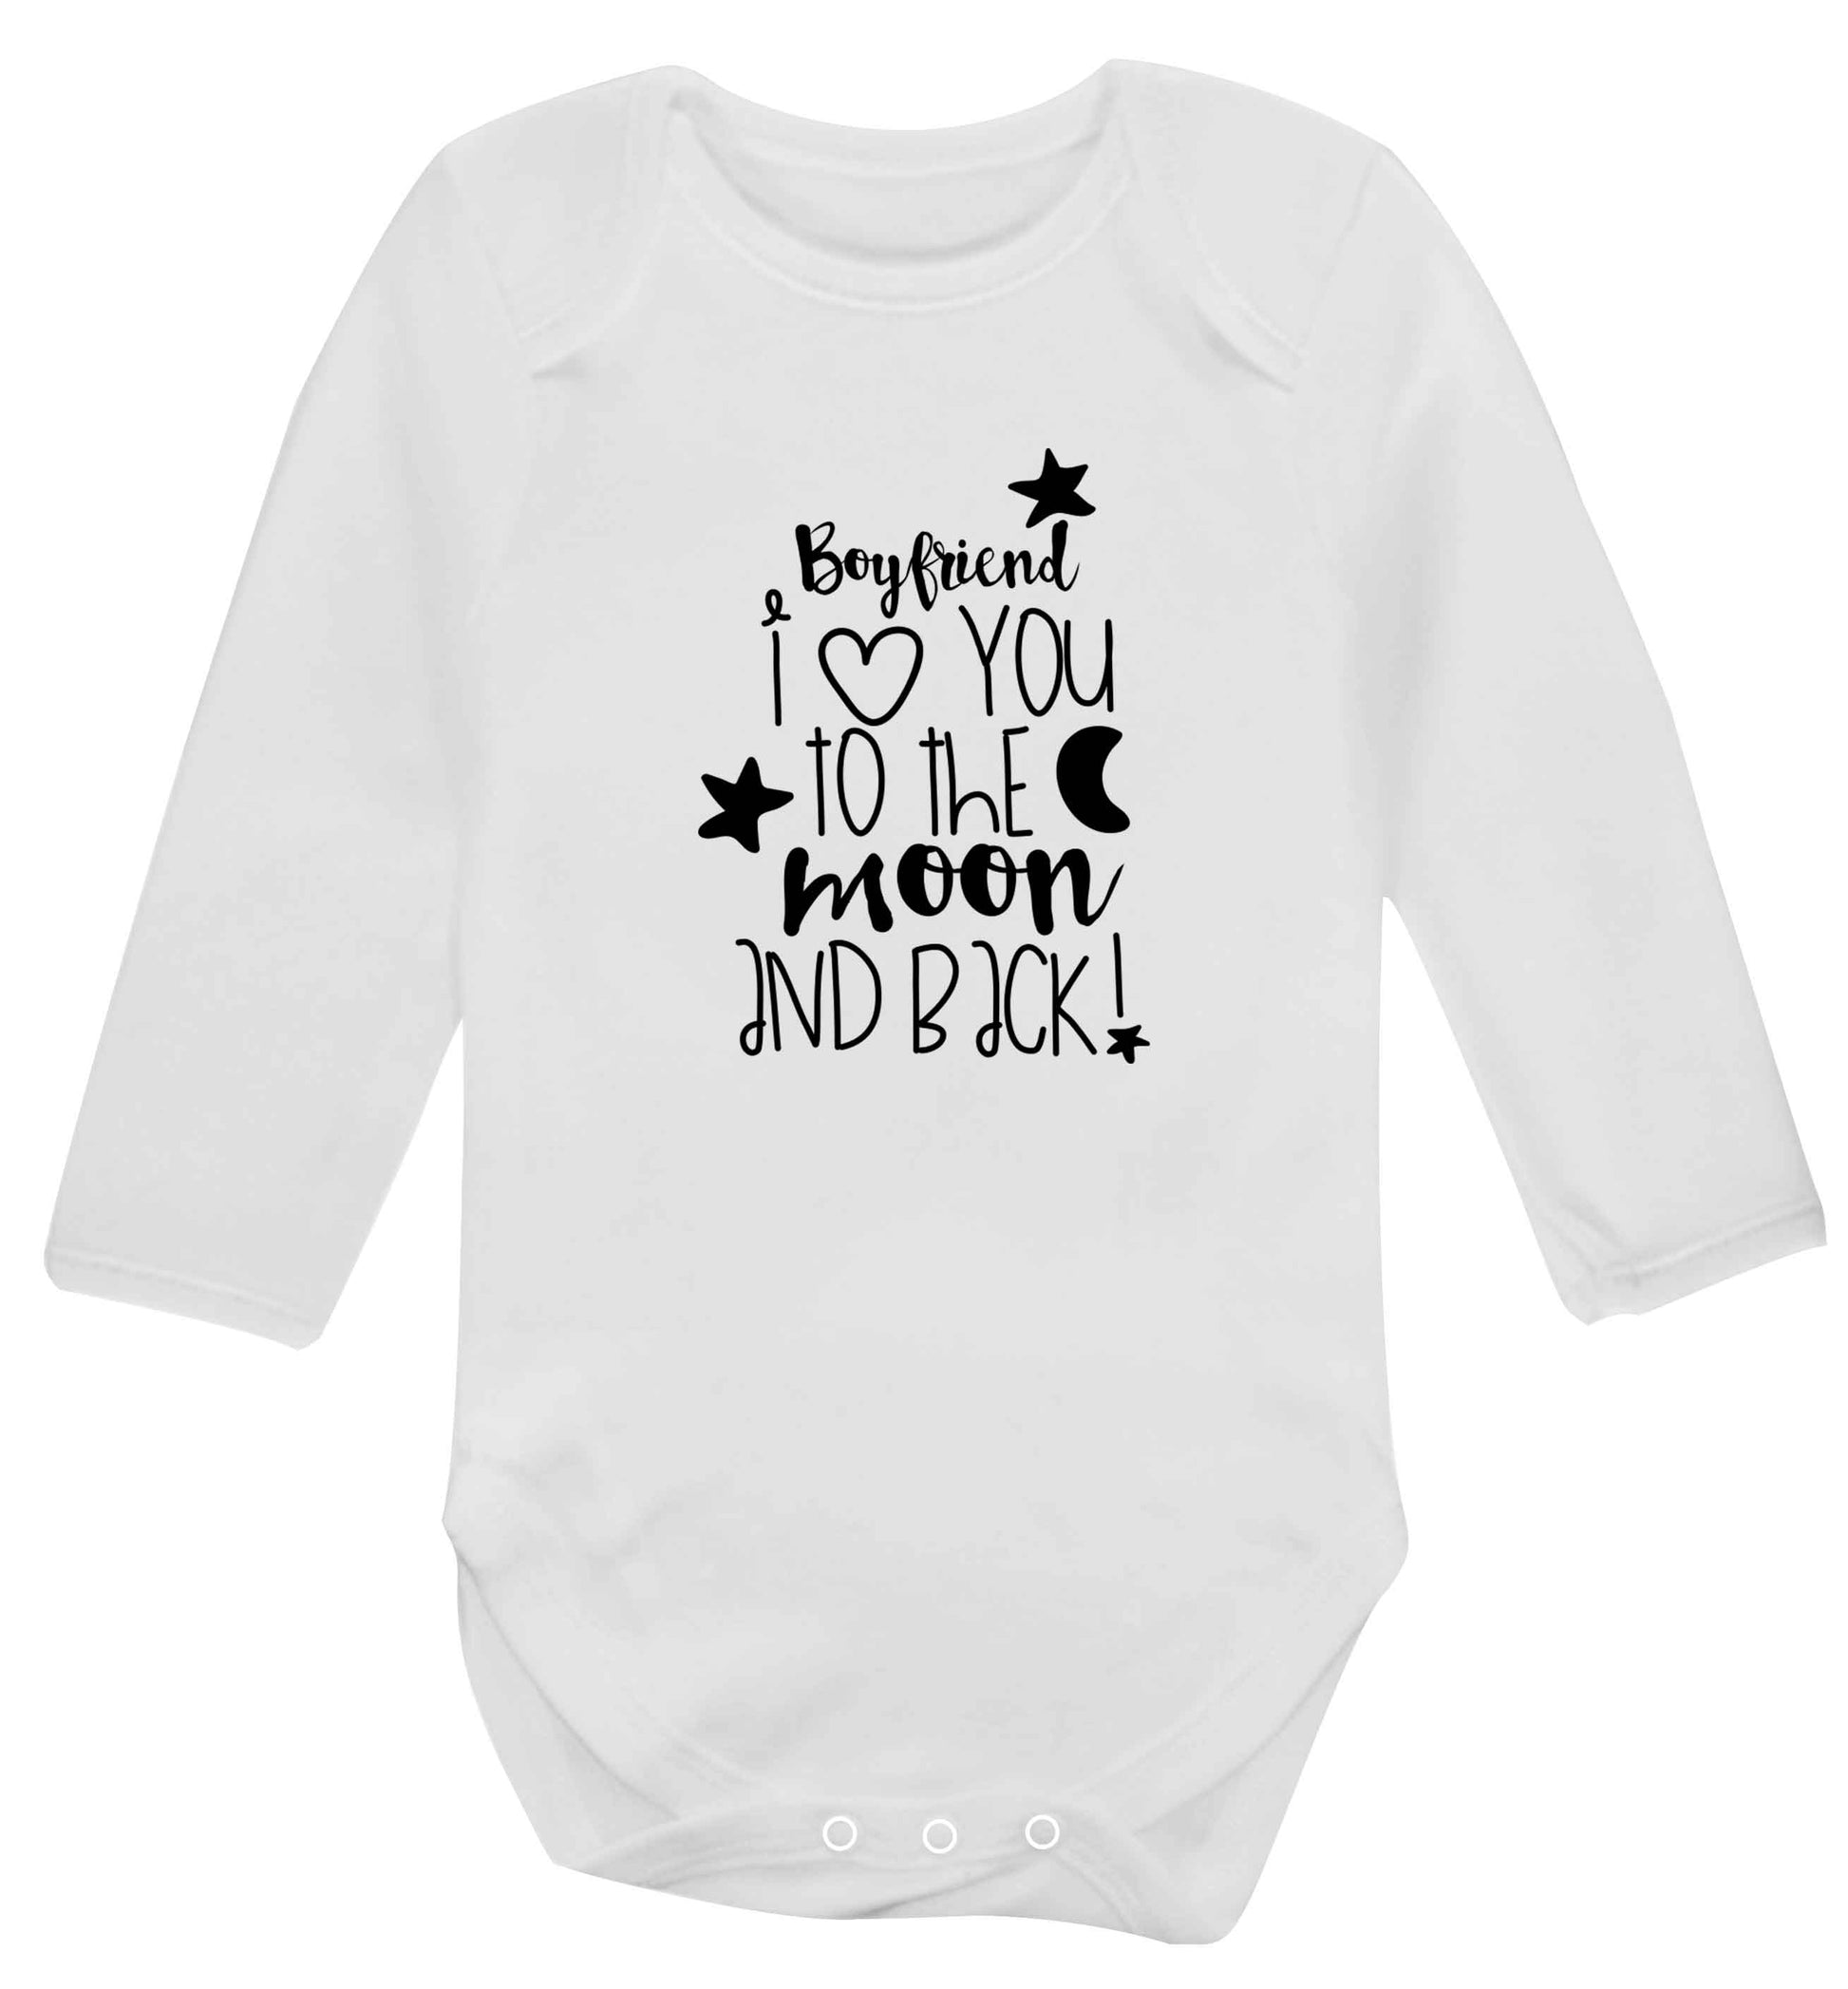 Boyfriend I love you to the moon and back baby vest long sleeved white 6-12 months